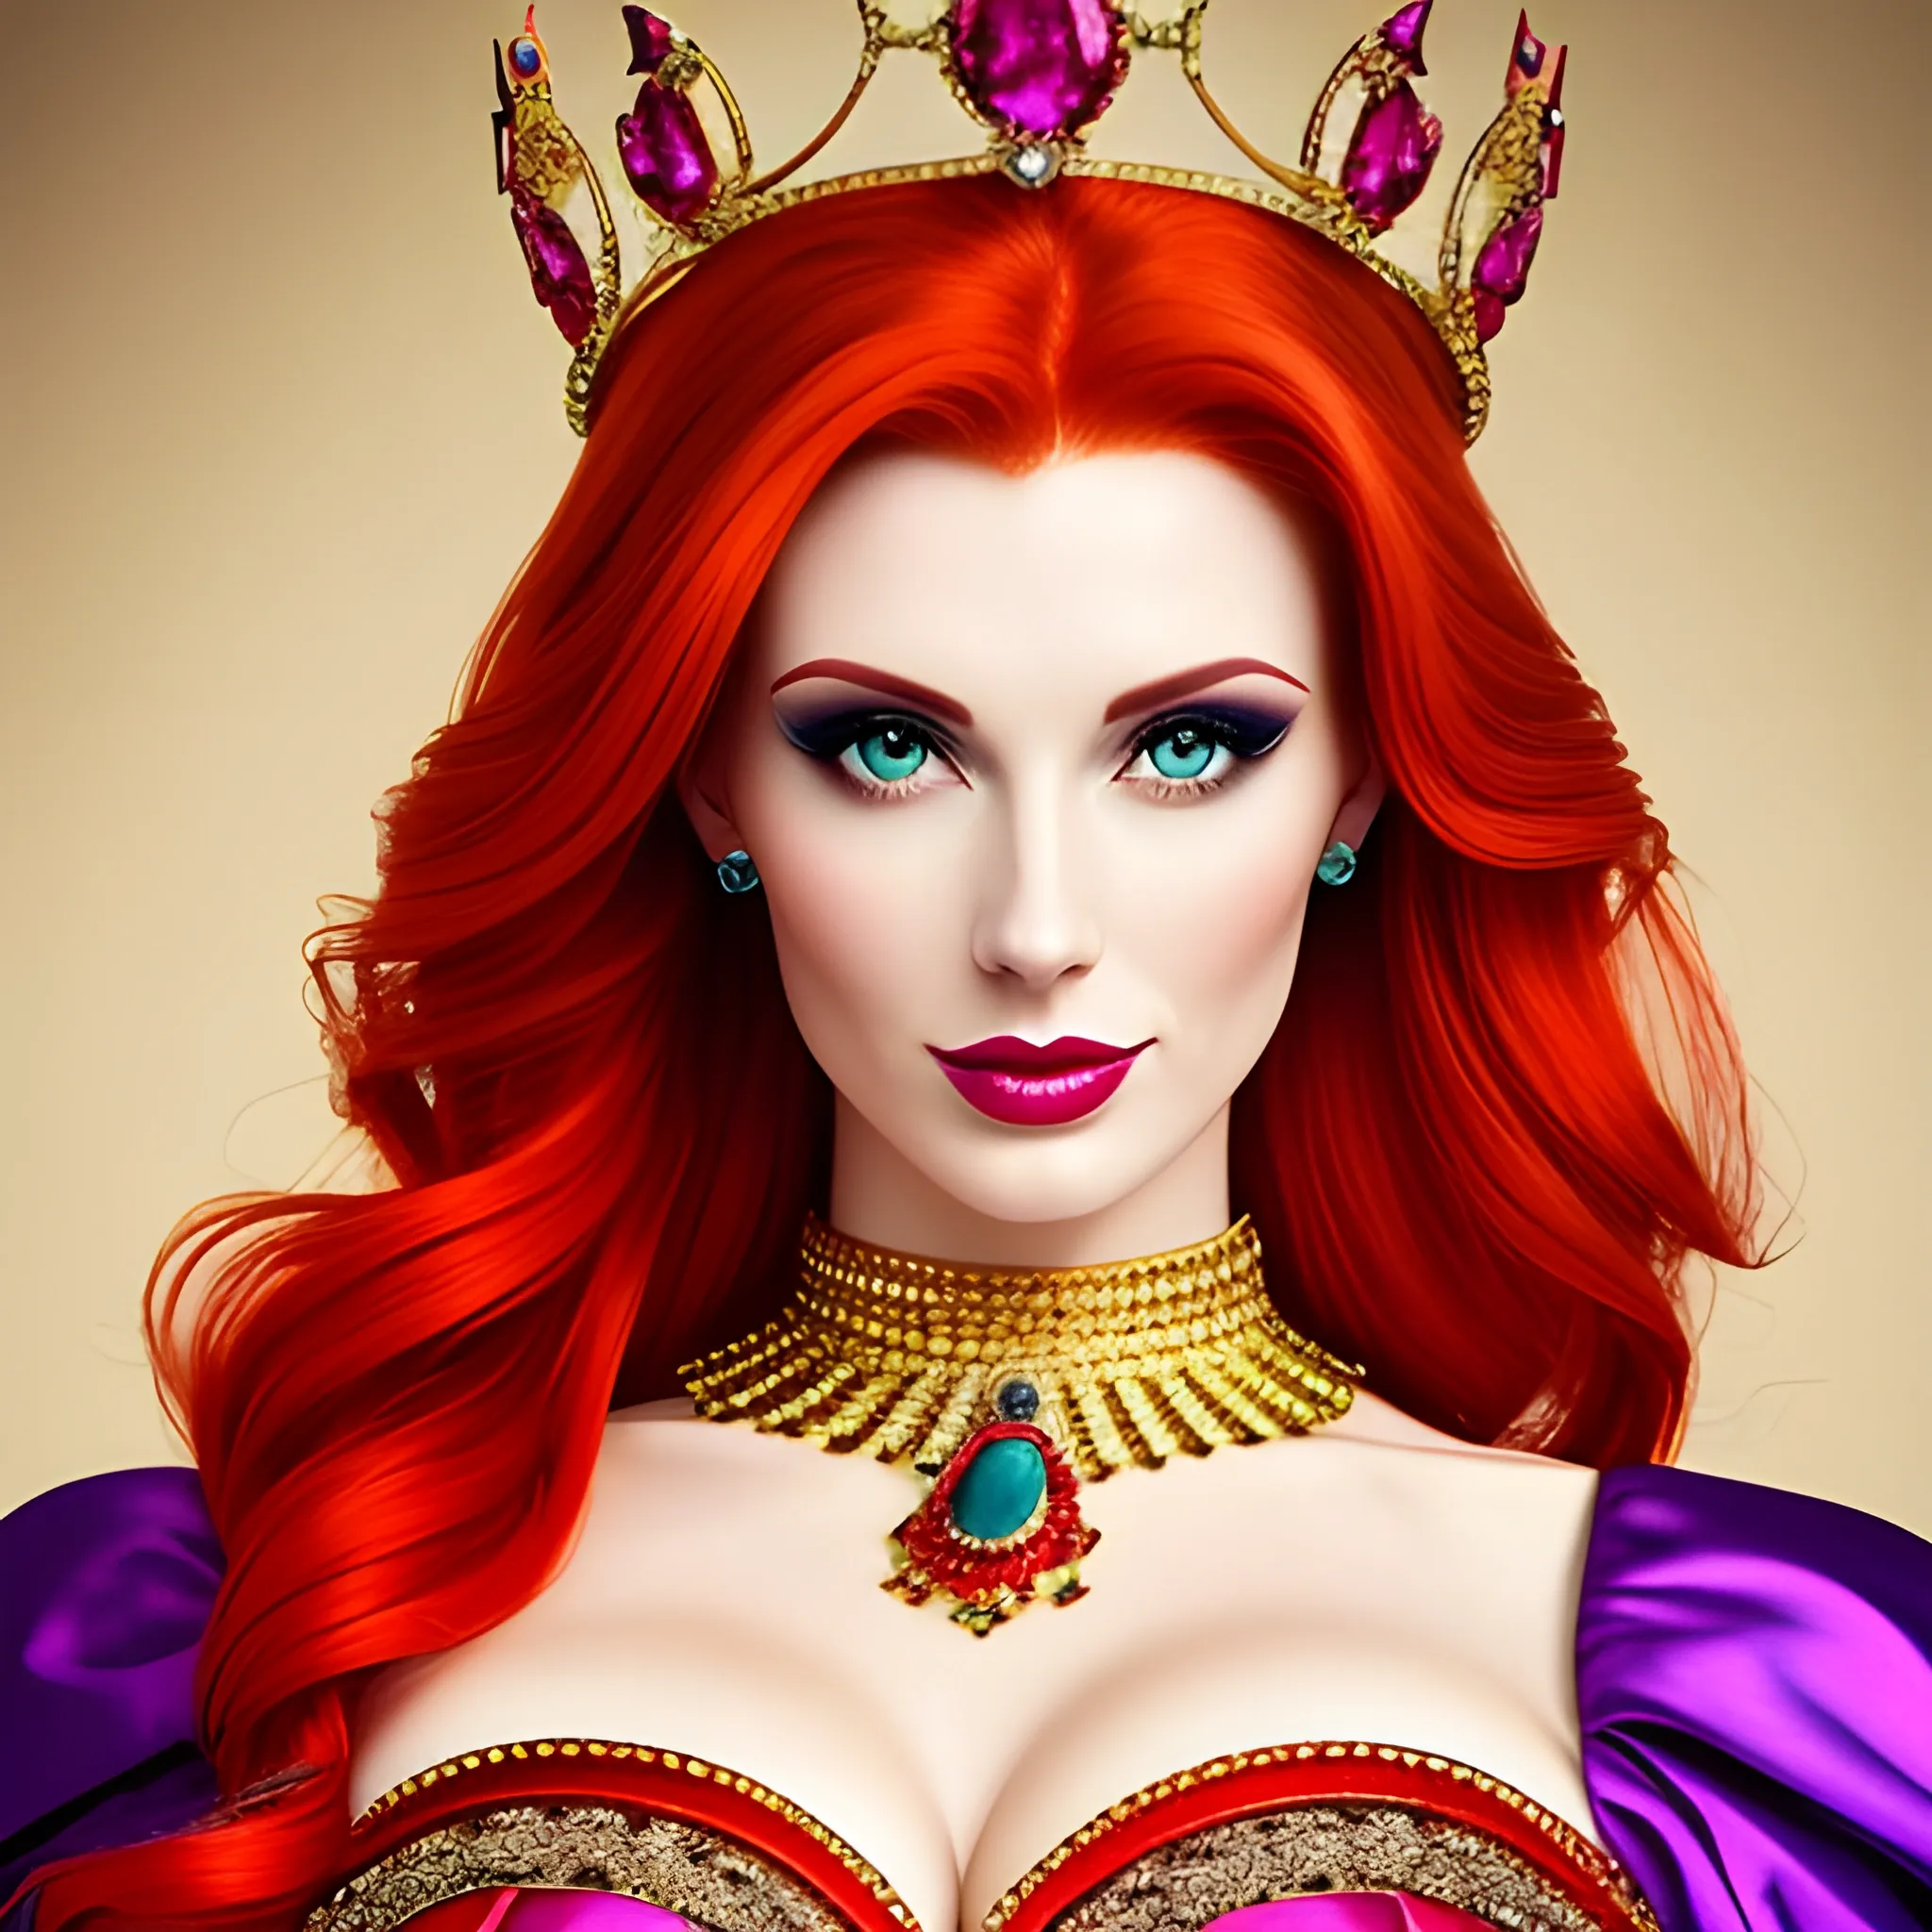 Beautiful redhead European woman with crown and colorful outfits, premium photography, ultra high definition, sexy ,10 years old